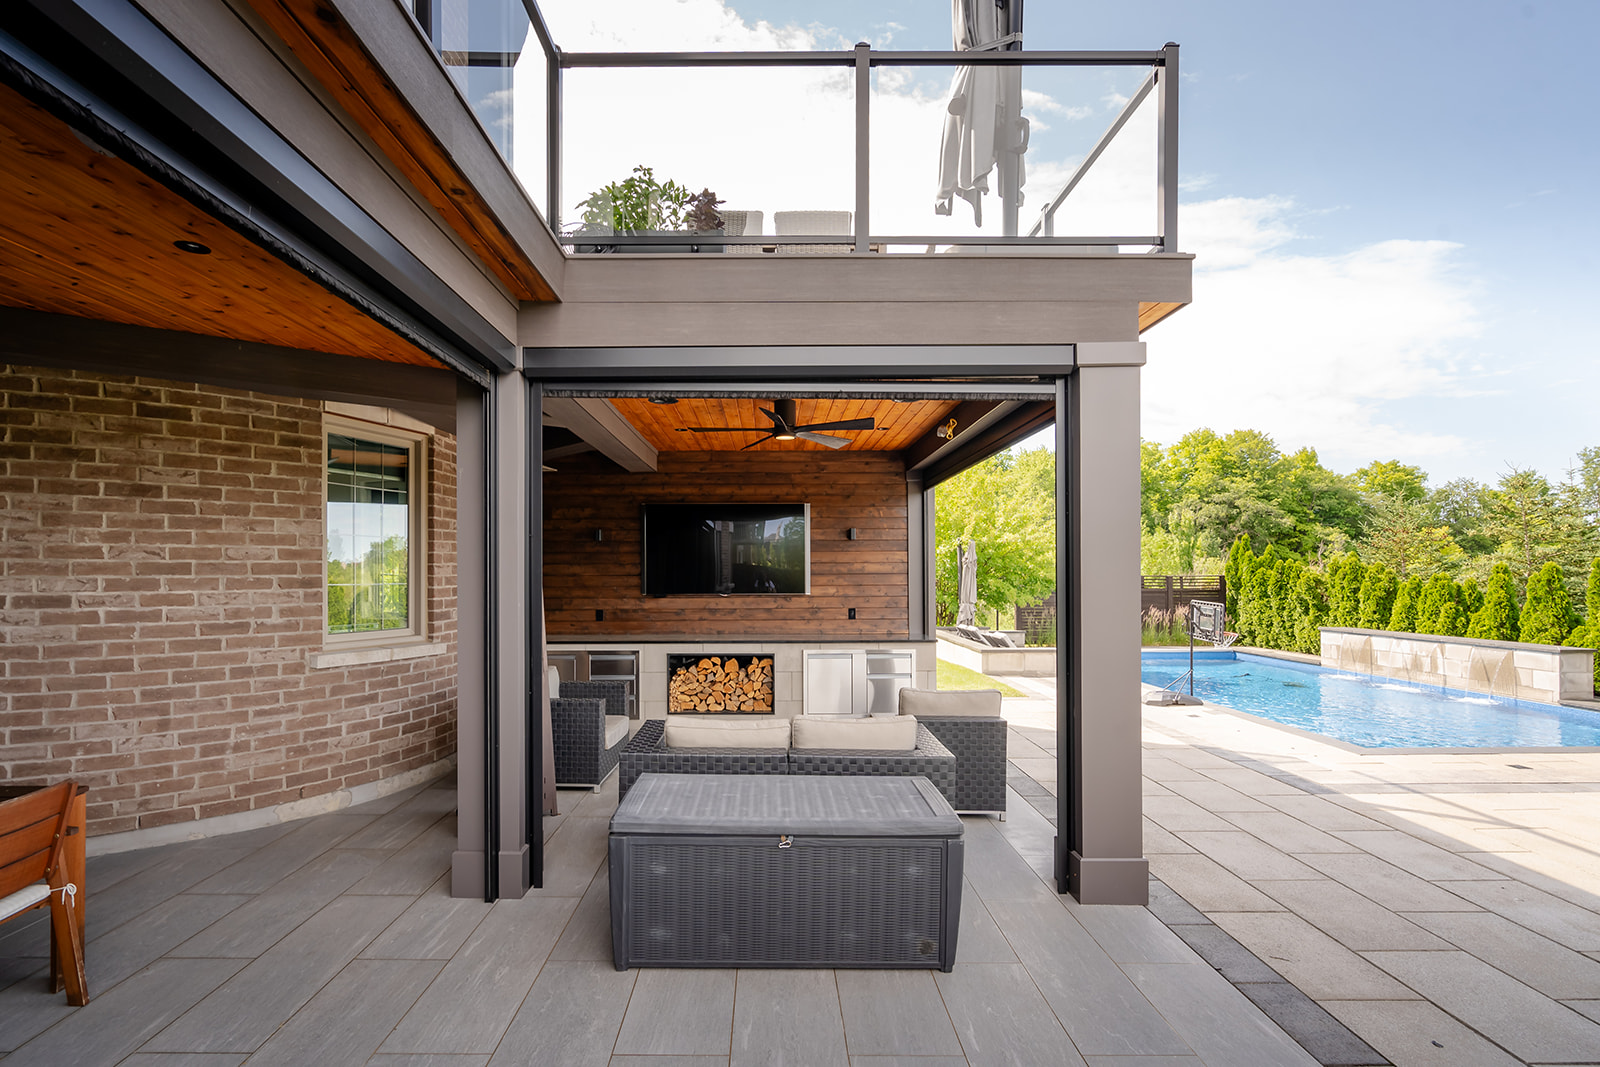 An outdoor patio set underneath a deck with an inground pool on the right.